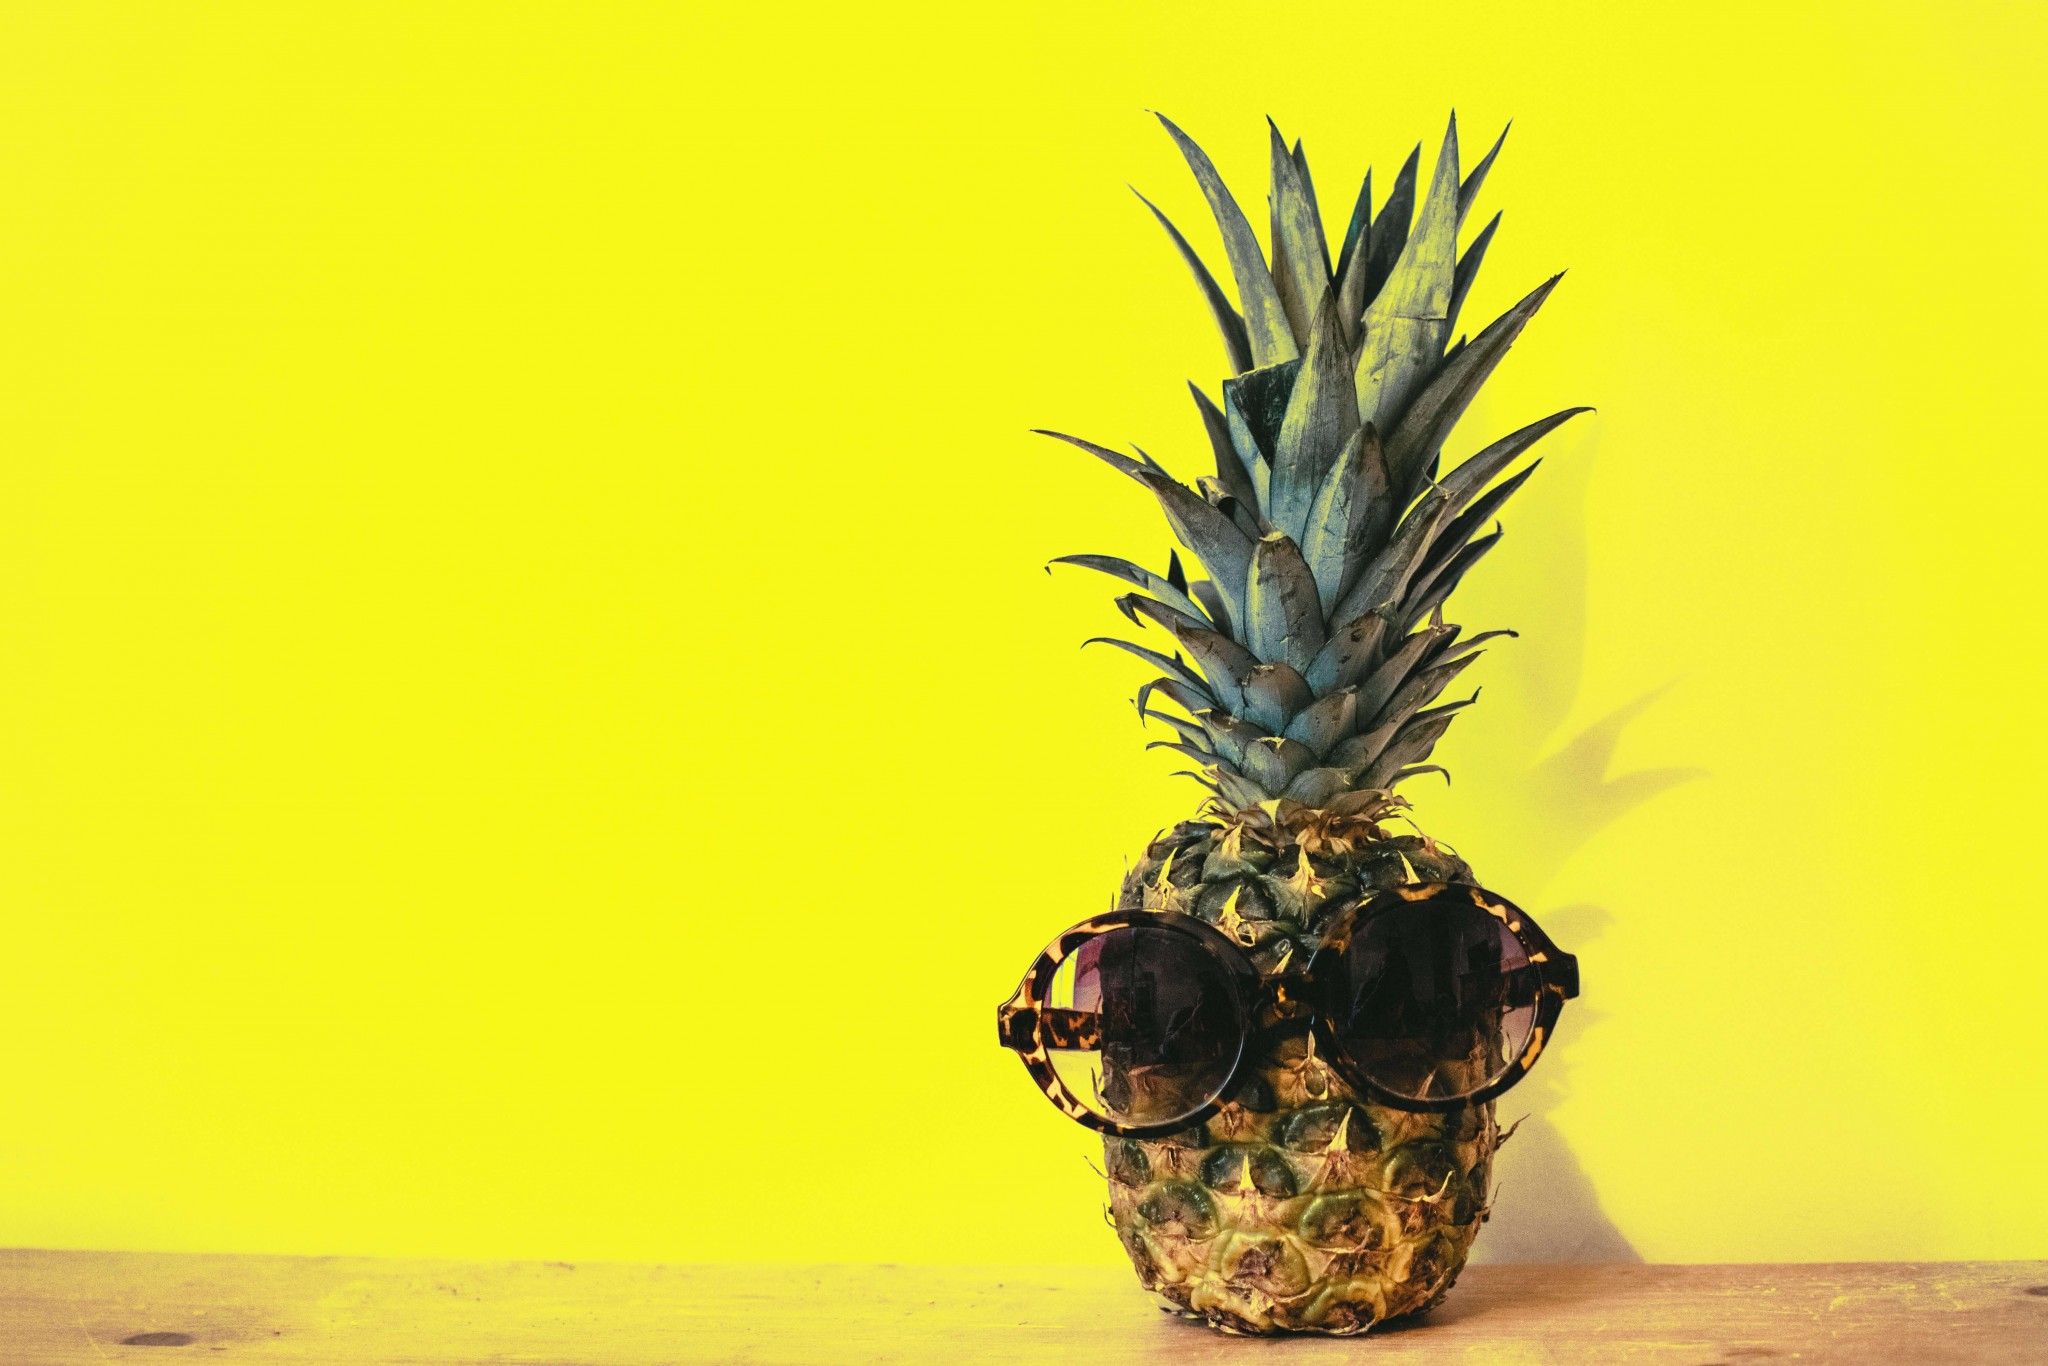 How to pick the best pineapple every time.